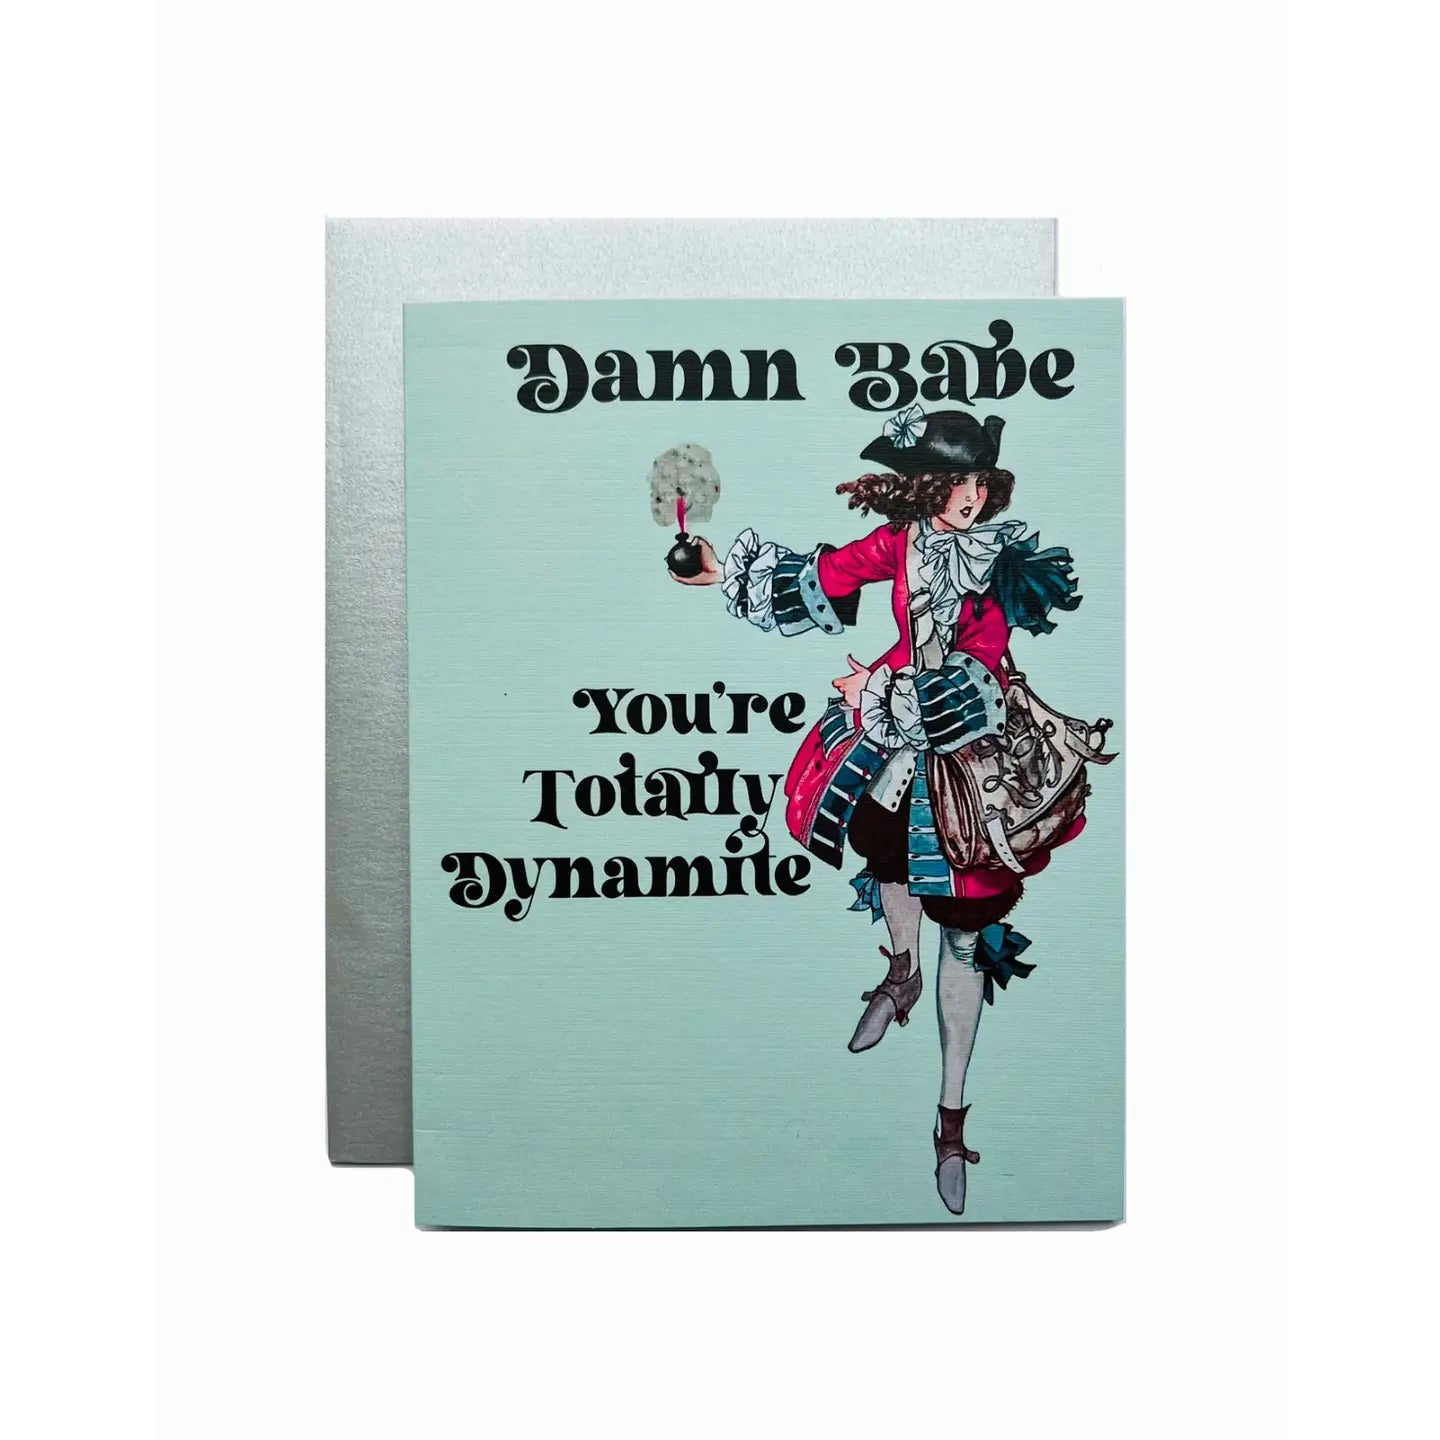 Damn babe you're totally dynamite greeting card